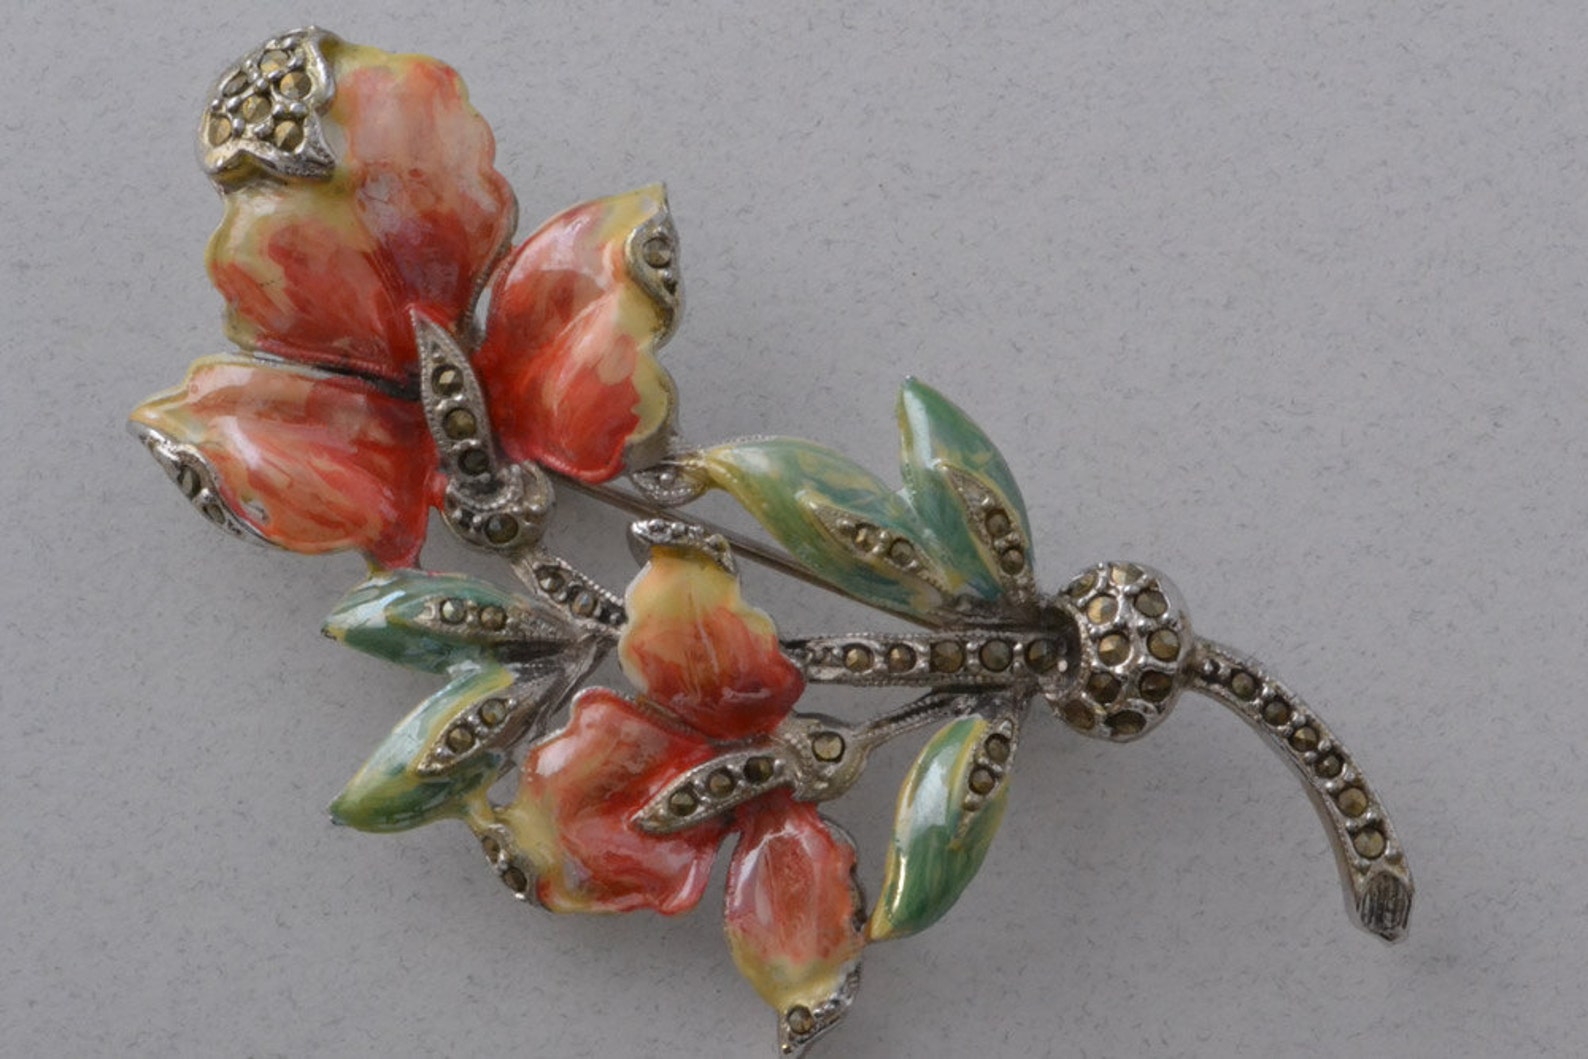 Vintage Floral Brooch With Enamel and Marcasite 2034 - Etsy